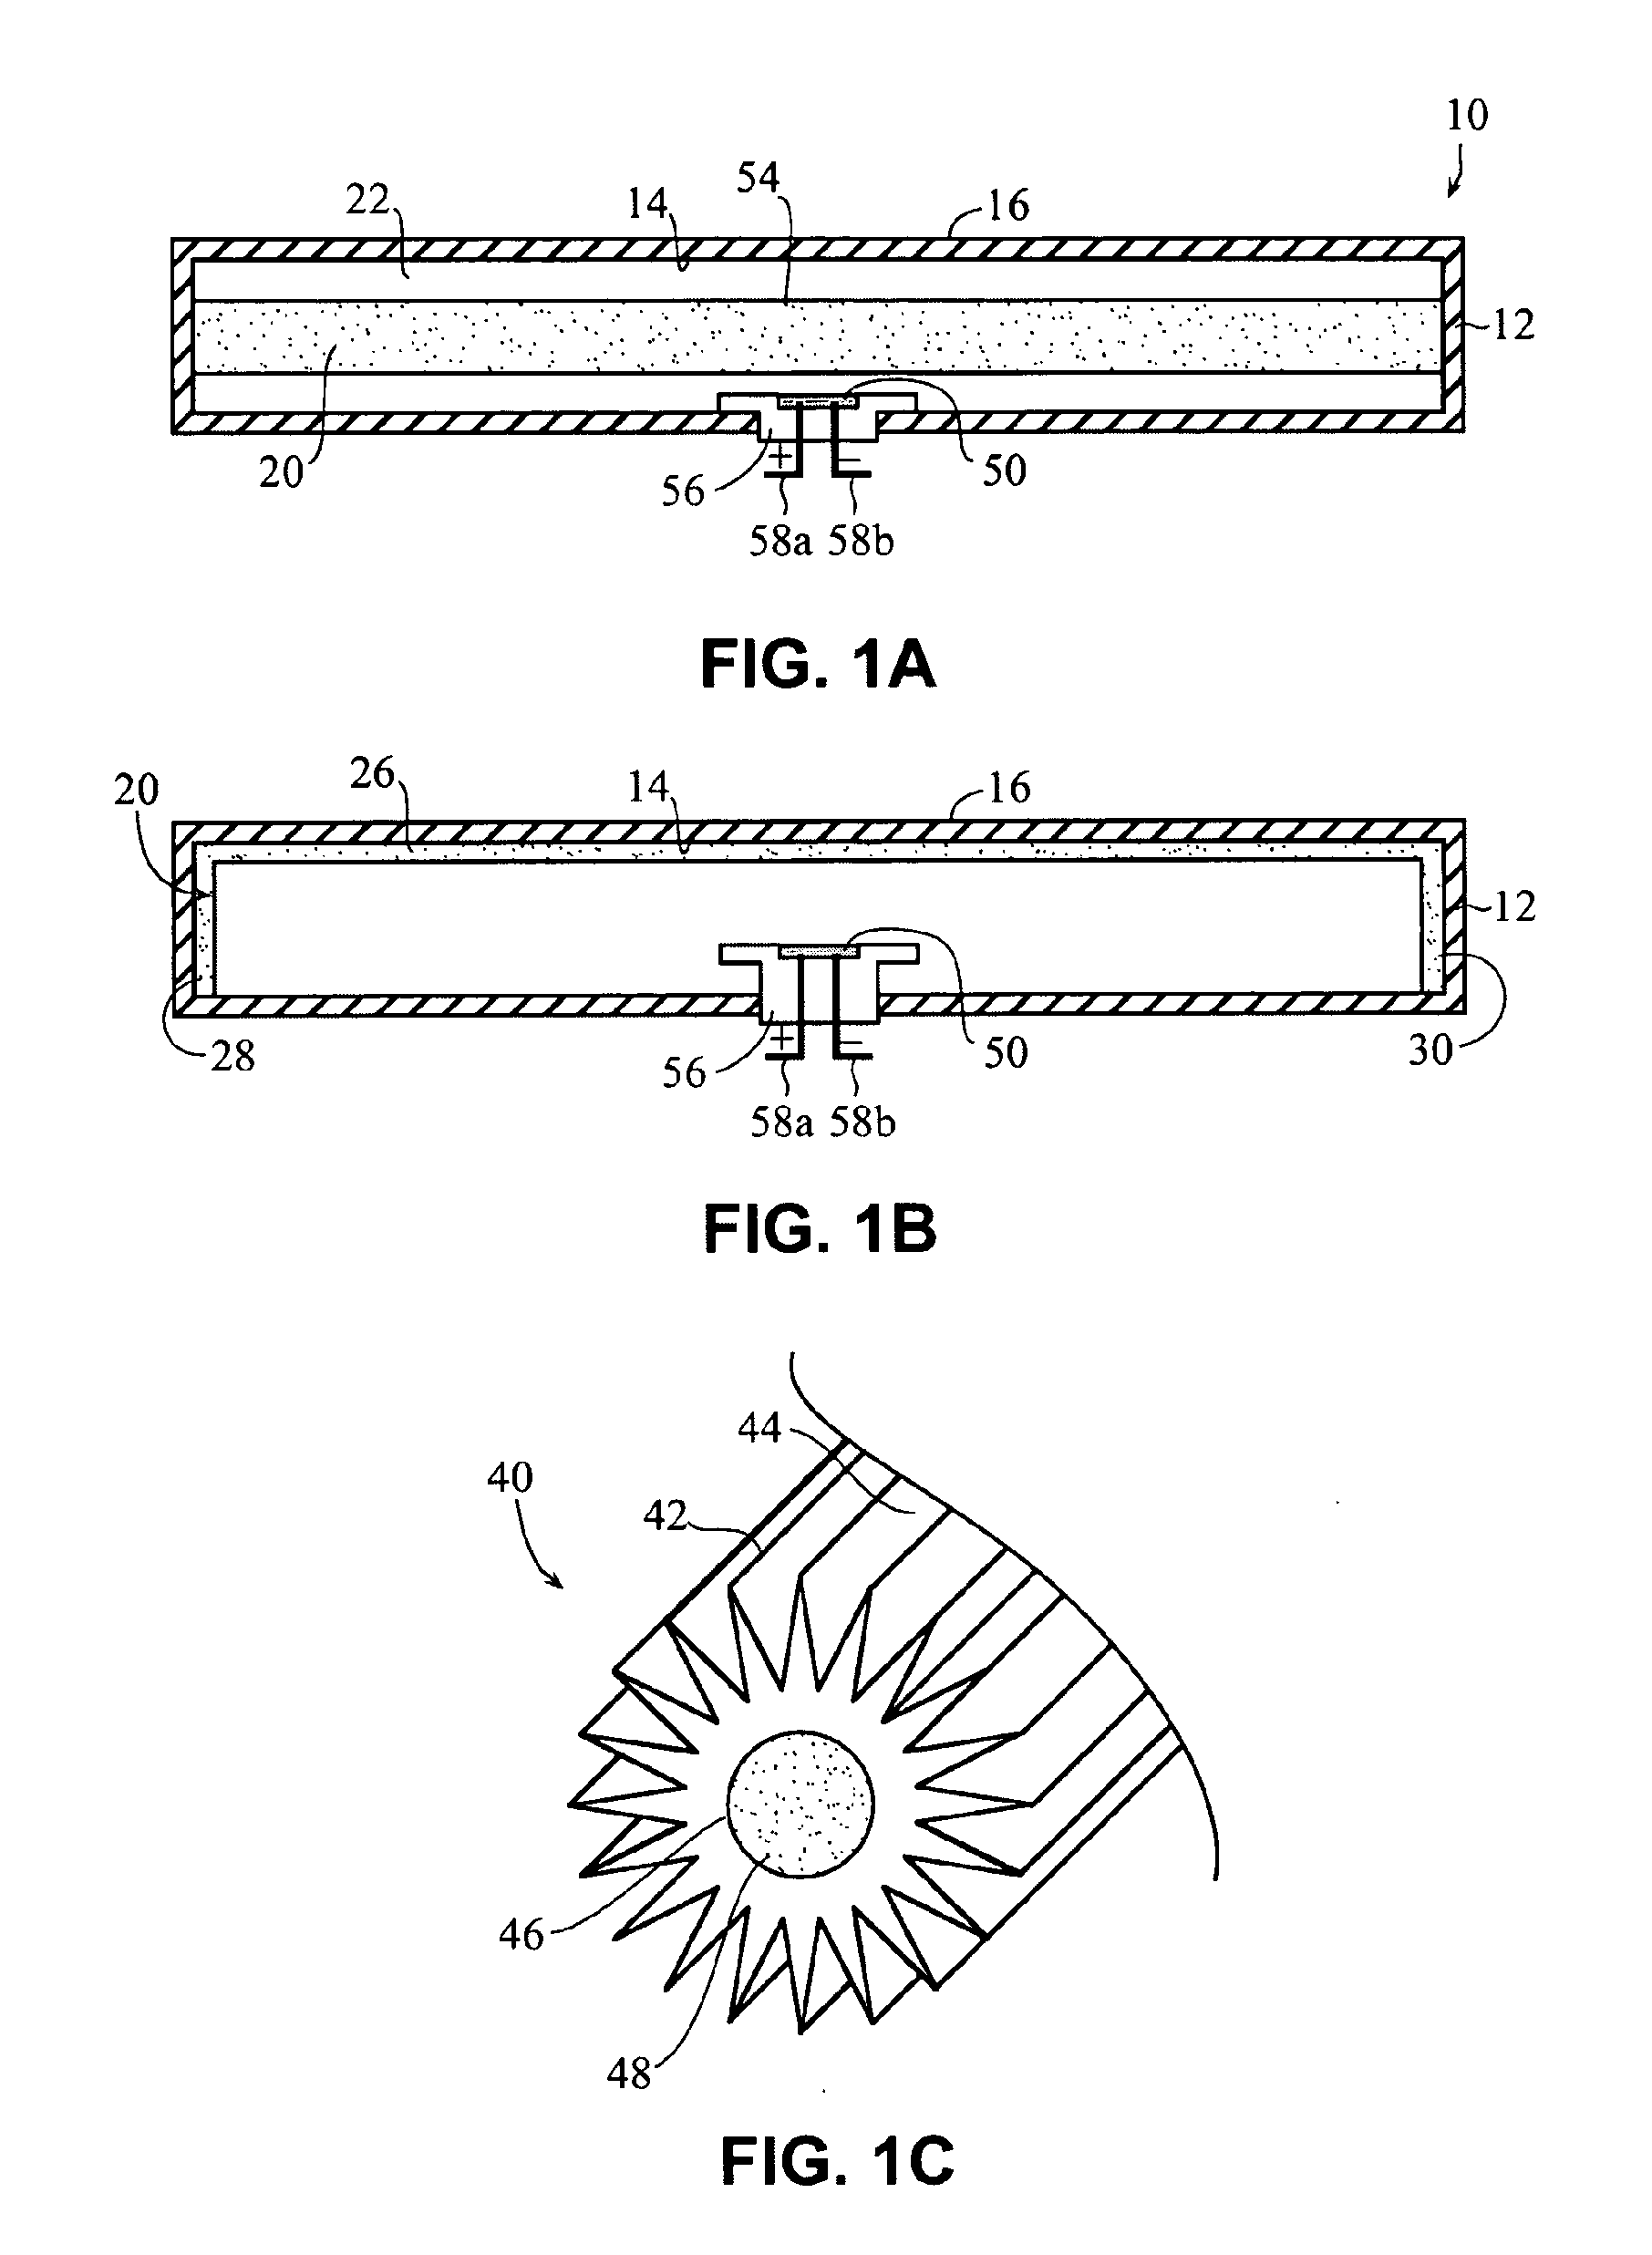 Self-contained Heating Unit and Drug-Supply Unit Employing Same